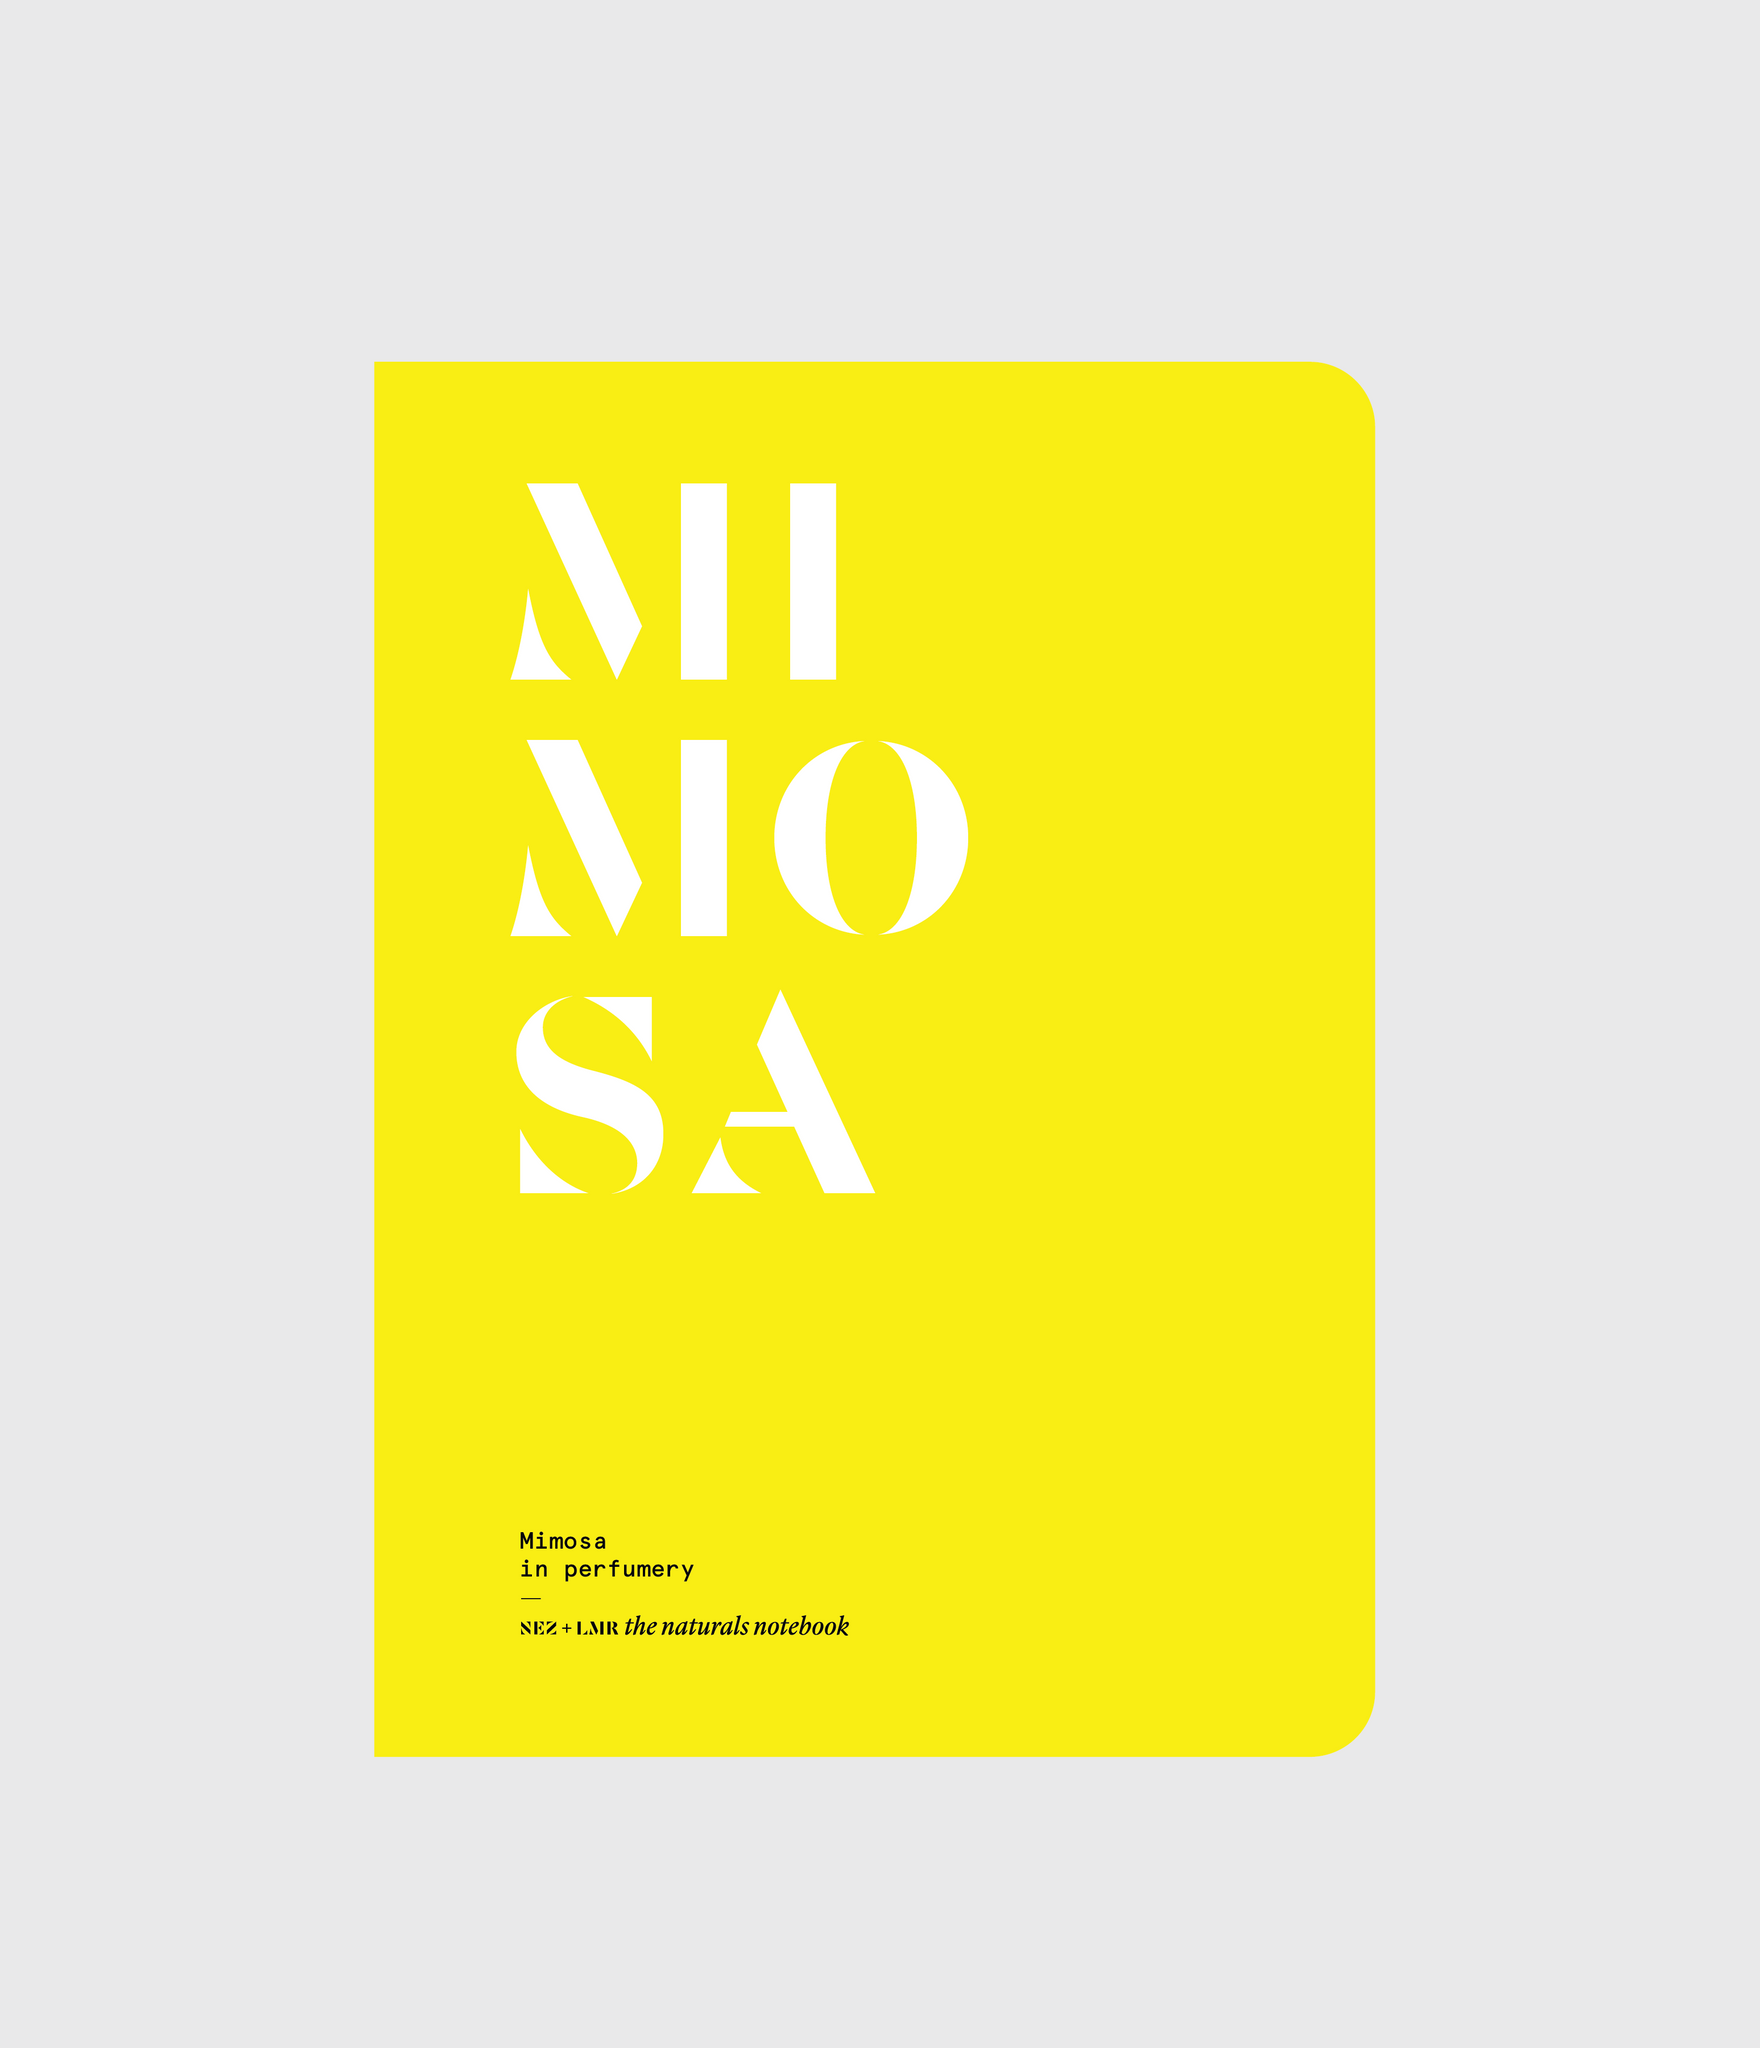 NEZ + LMR the naturals notebook | Mimosa in Perfumery